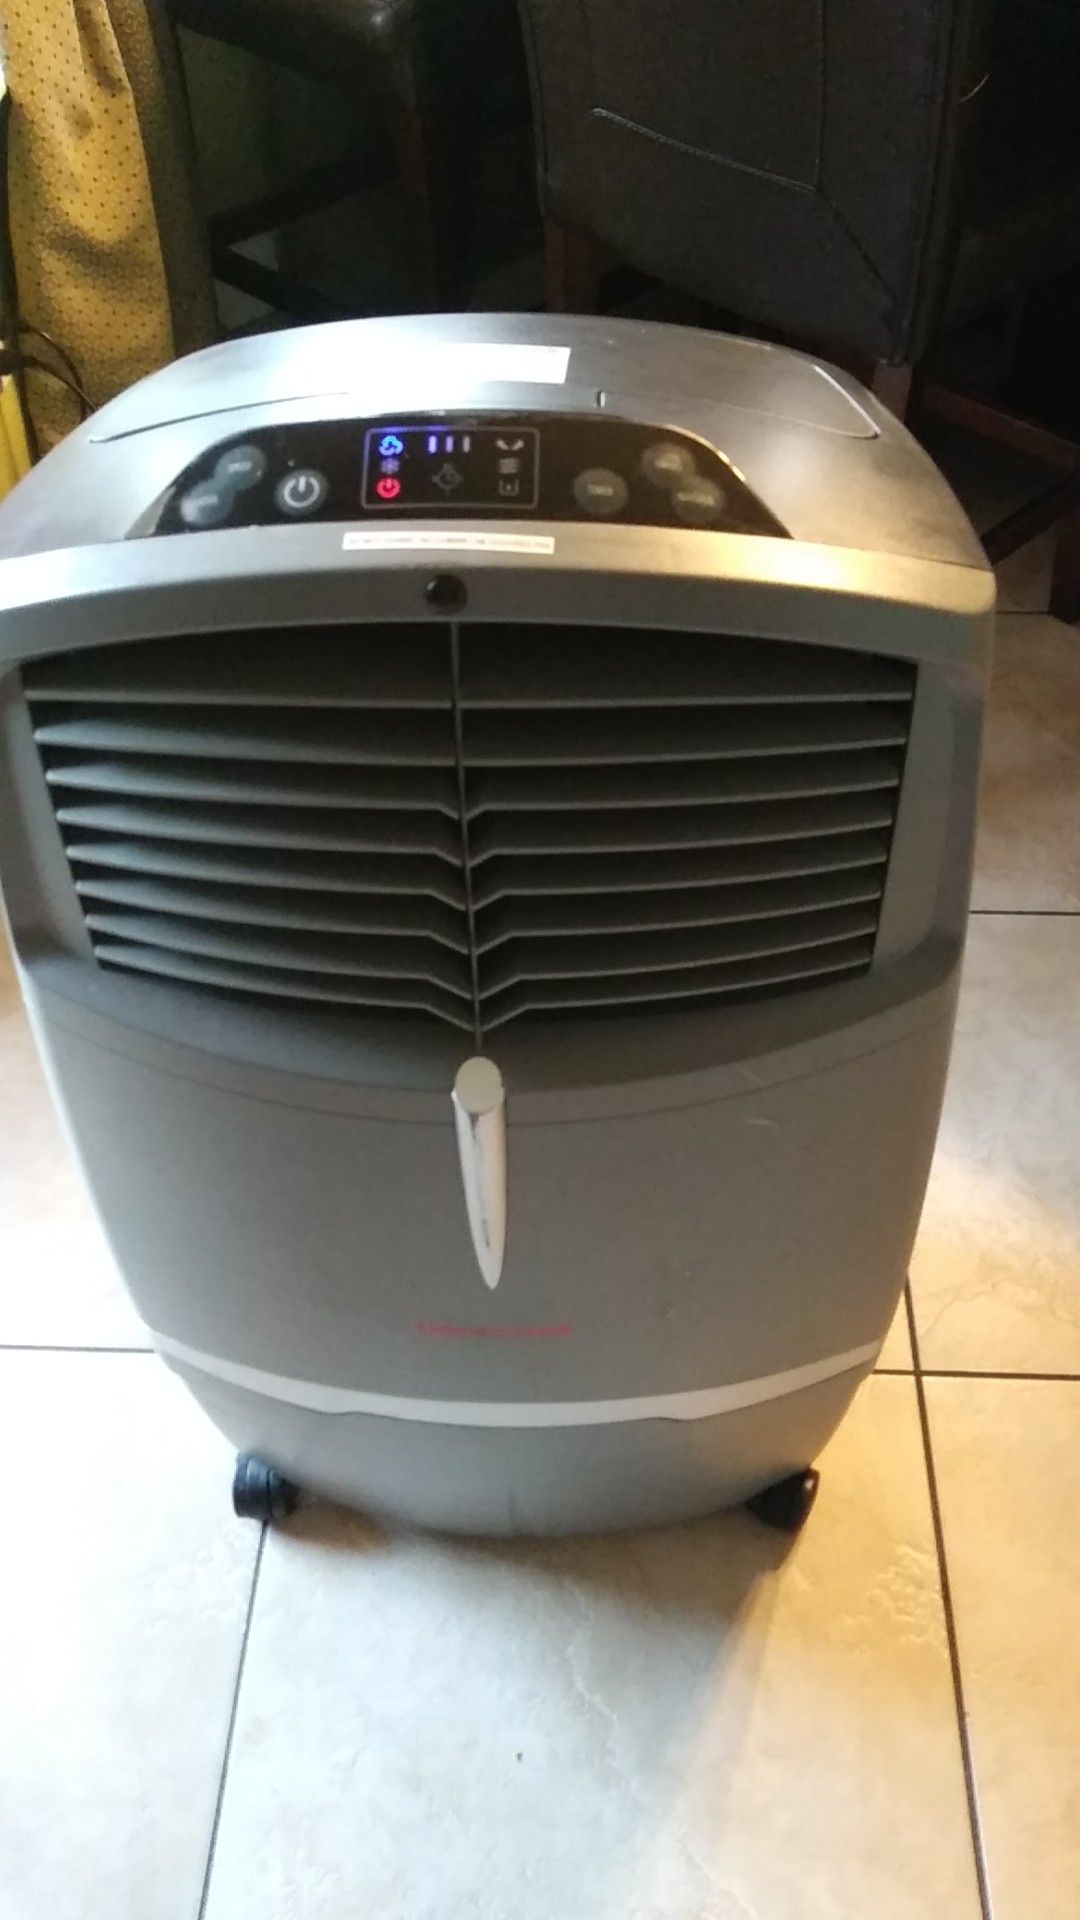 Portable AC unit Honeywell gets very cold